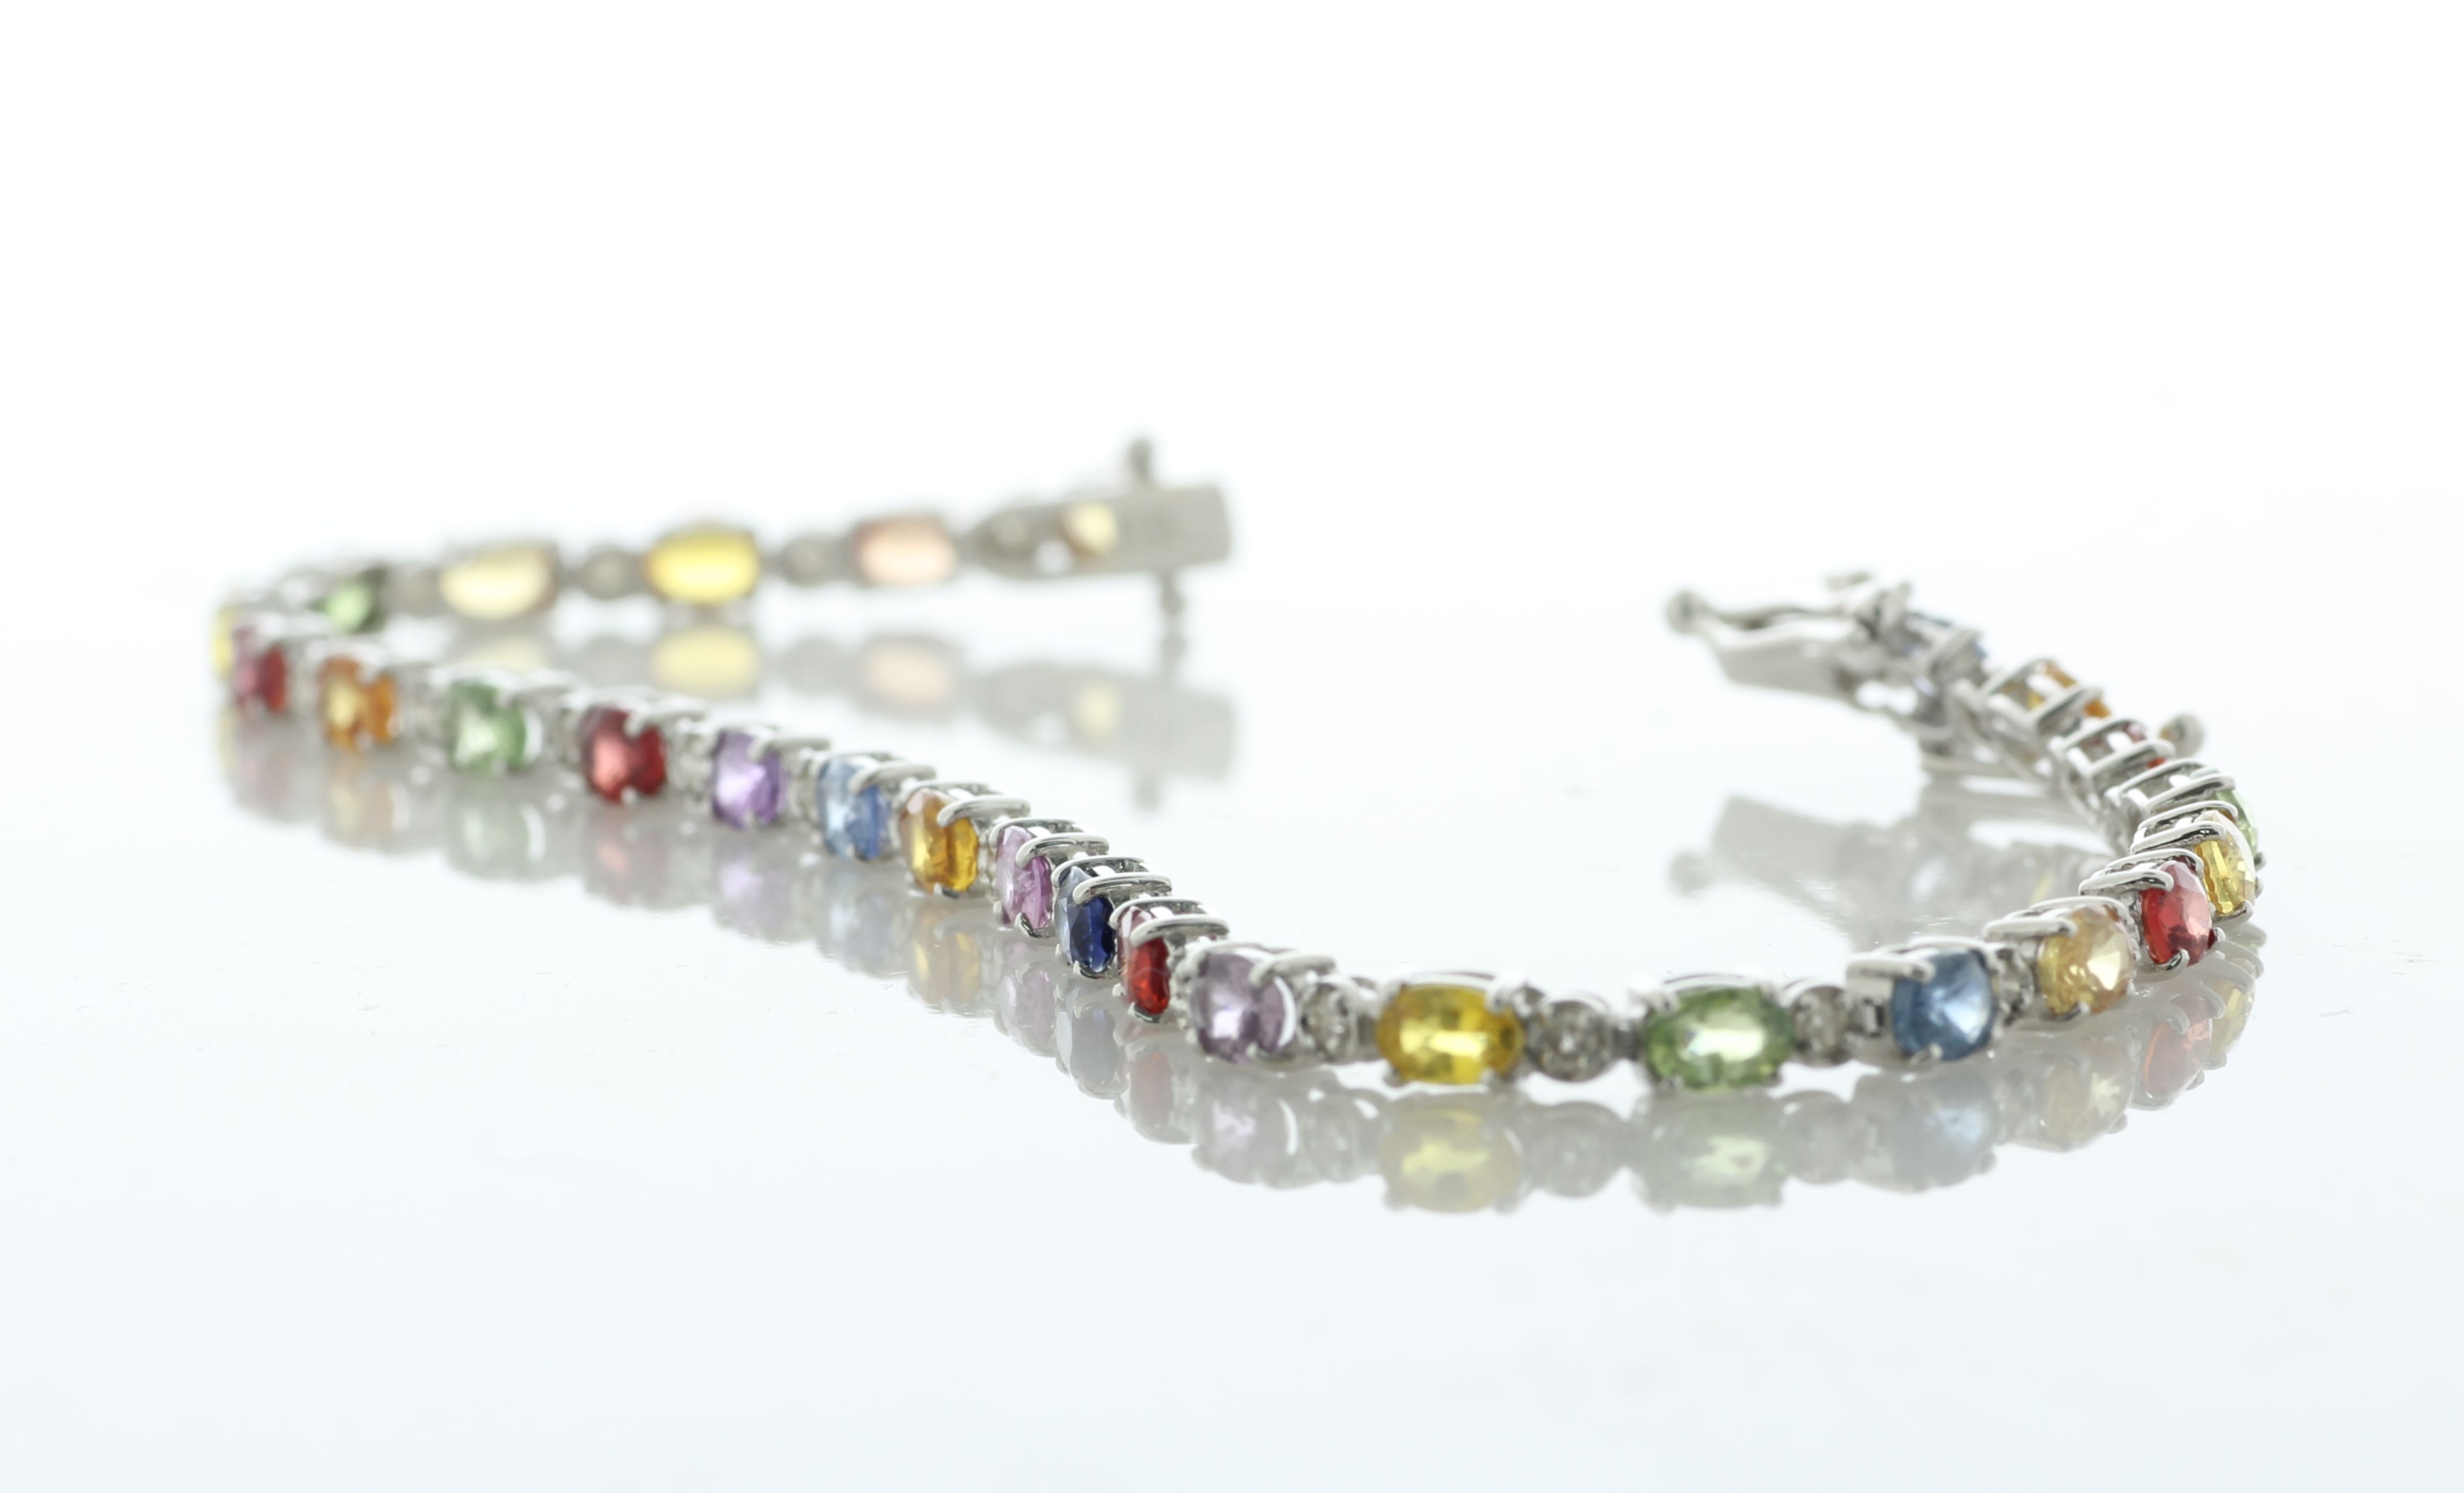 18ct White Gold Diamond And Coloured Sapphire Bracelet (S6.02) 0.38 Carats - Valued By IDI £10,295. - Image 4 of 5